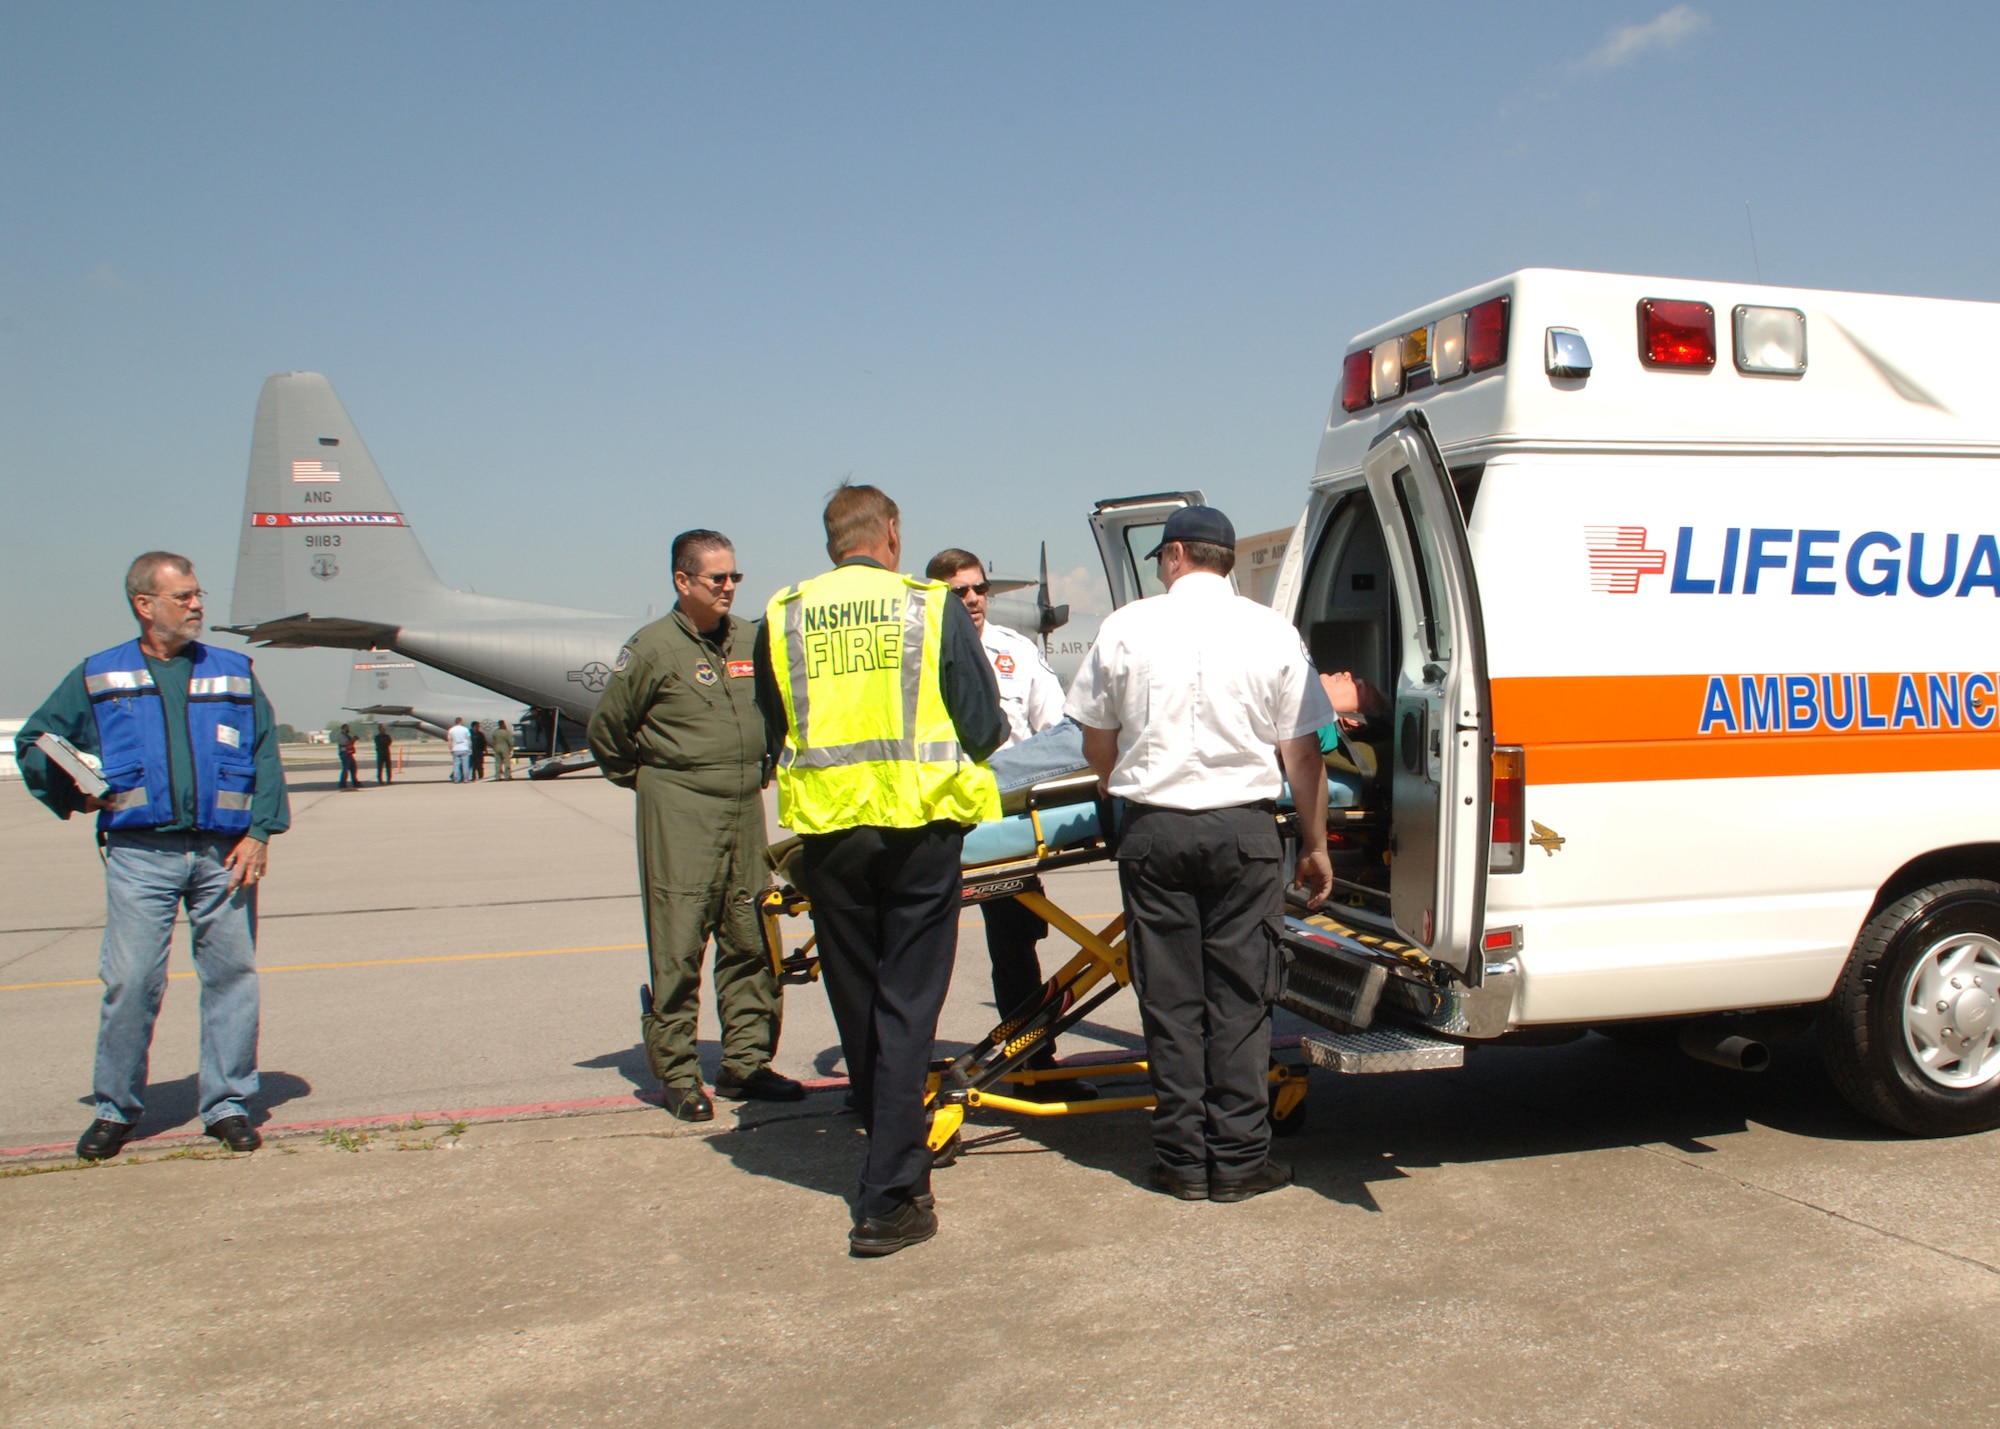 A patient is loaded into an ambulance to be transported to a nearby hospital. Once the patients reach the hospital, the drill is over. They are delivered by a bus back to the base so they can return home.